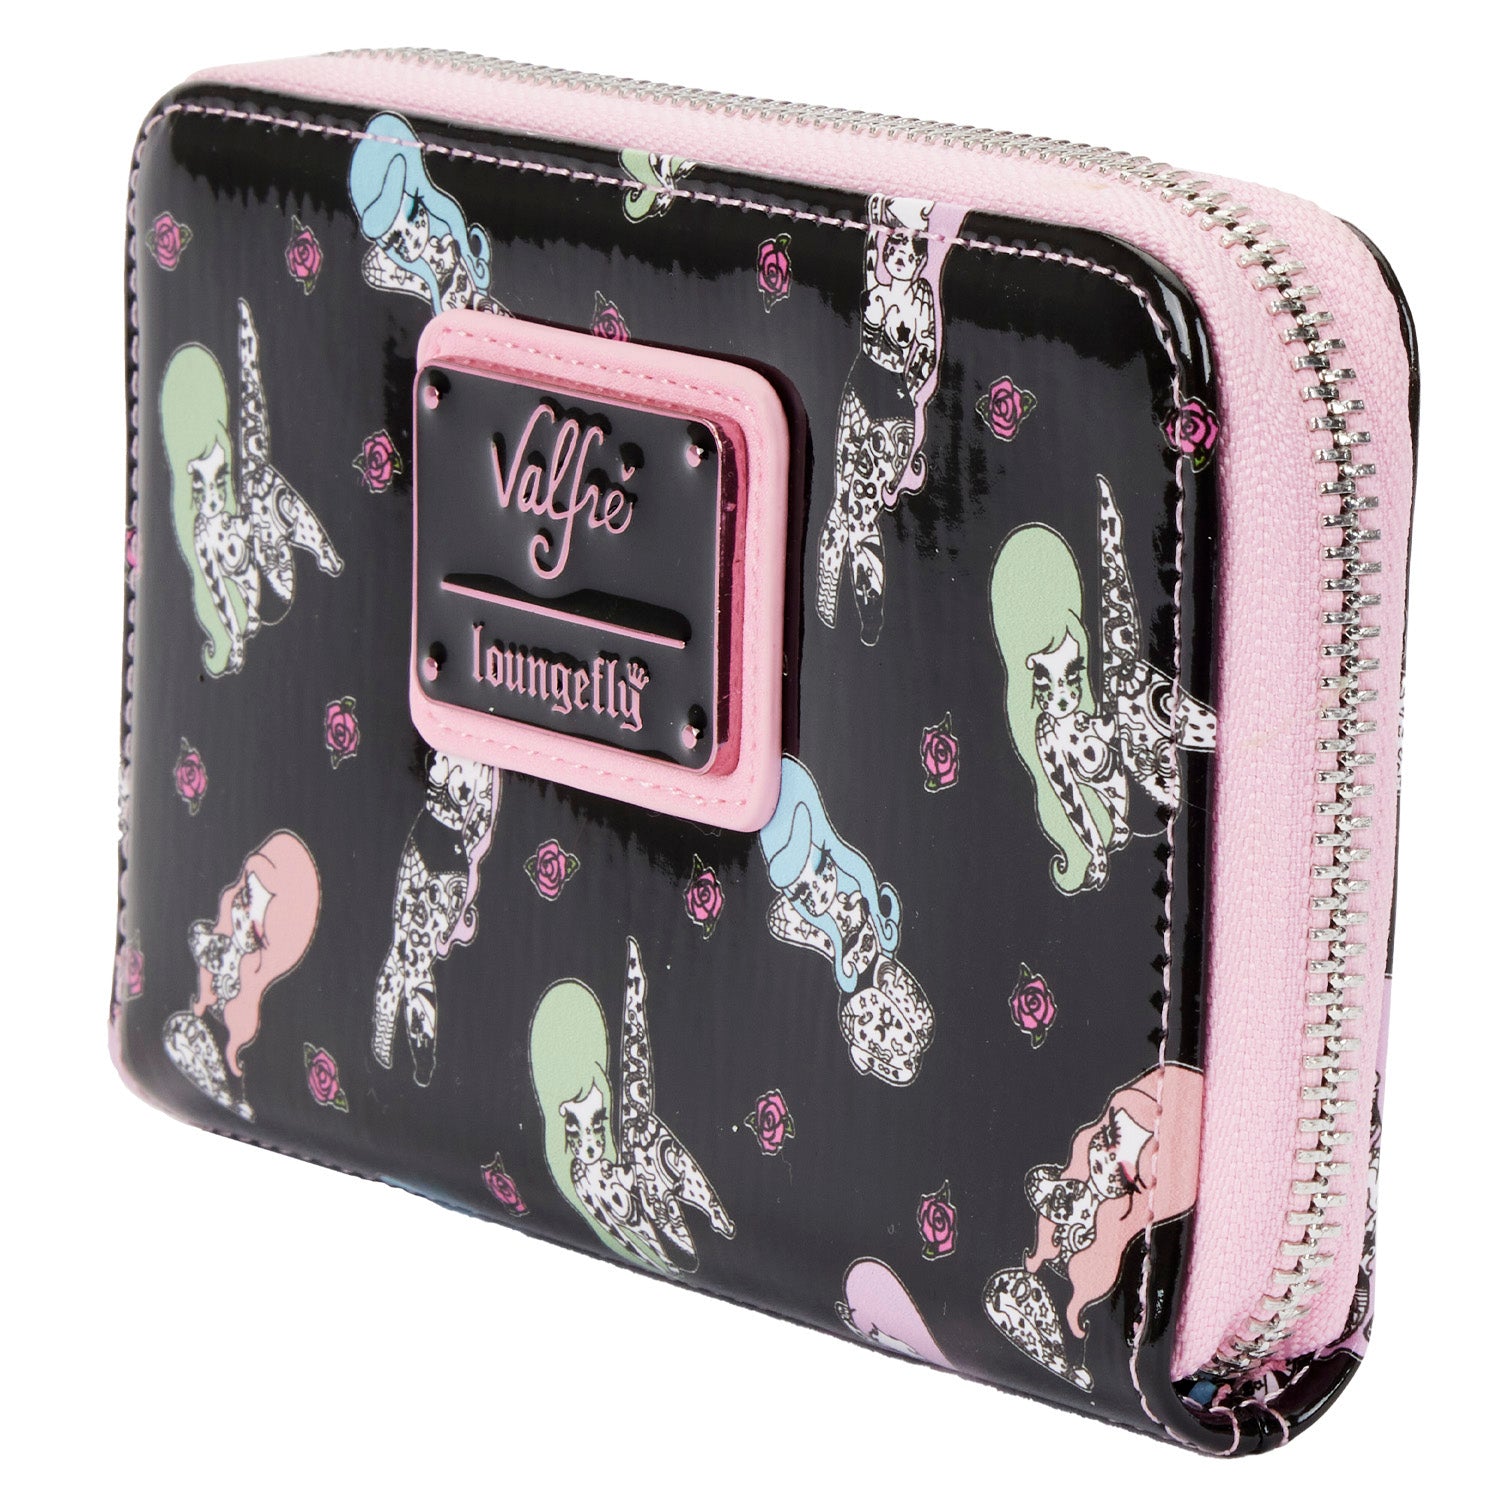 Valfre | Tattoo Pin-up All Over Print Zip Around Wallet